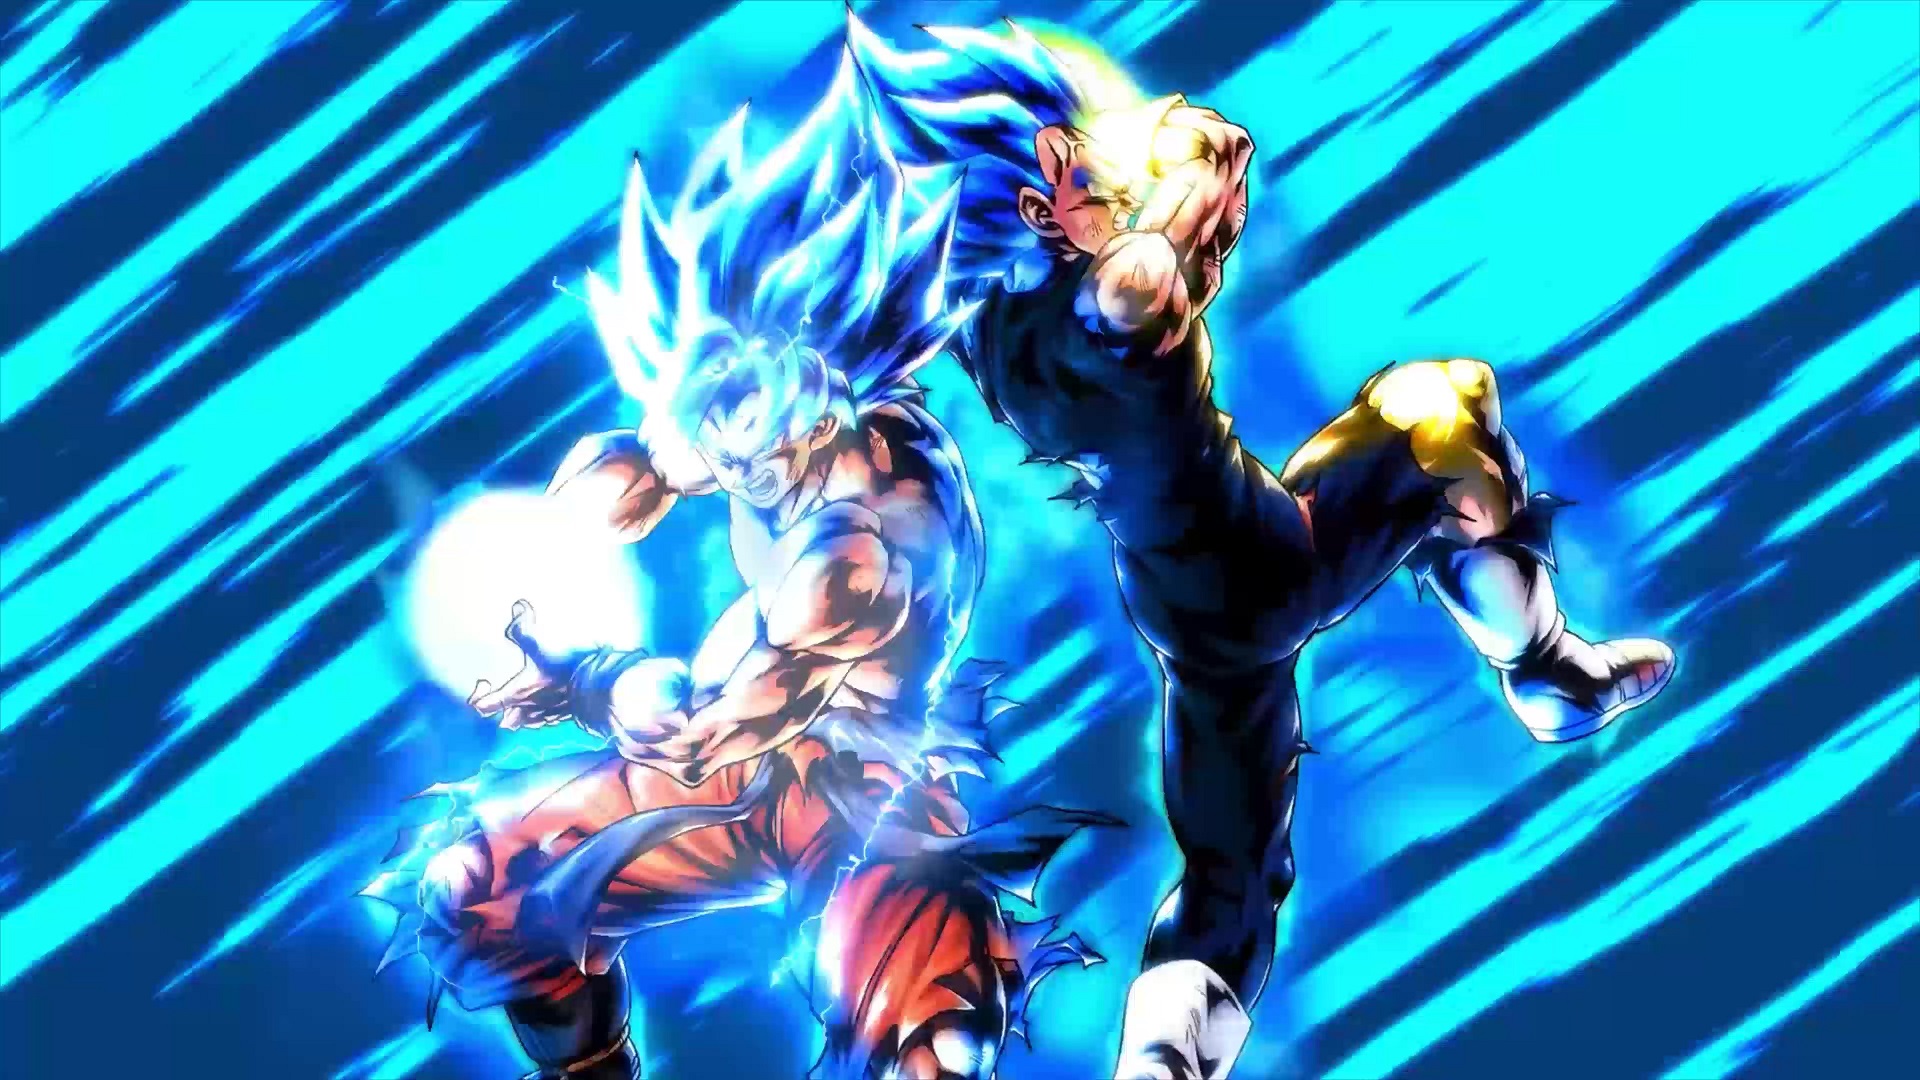 Top 999+ Dragon Ball Super Broly Wallpaper Full HD, 4K✓Free to Use